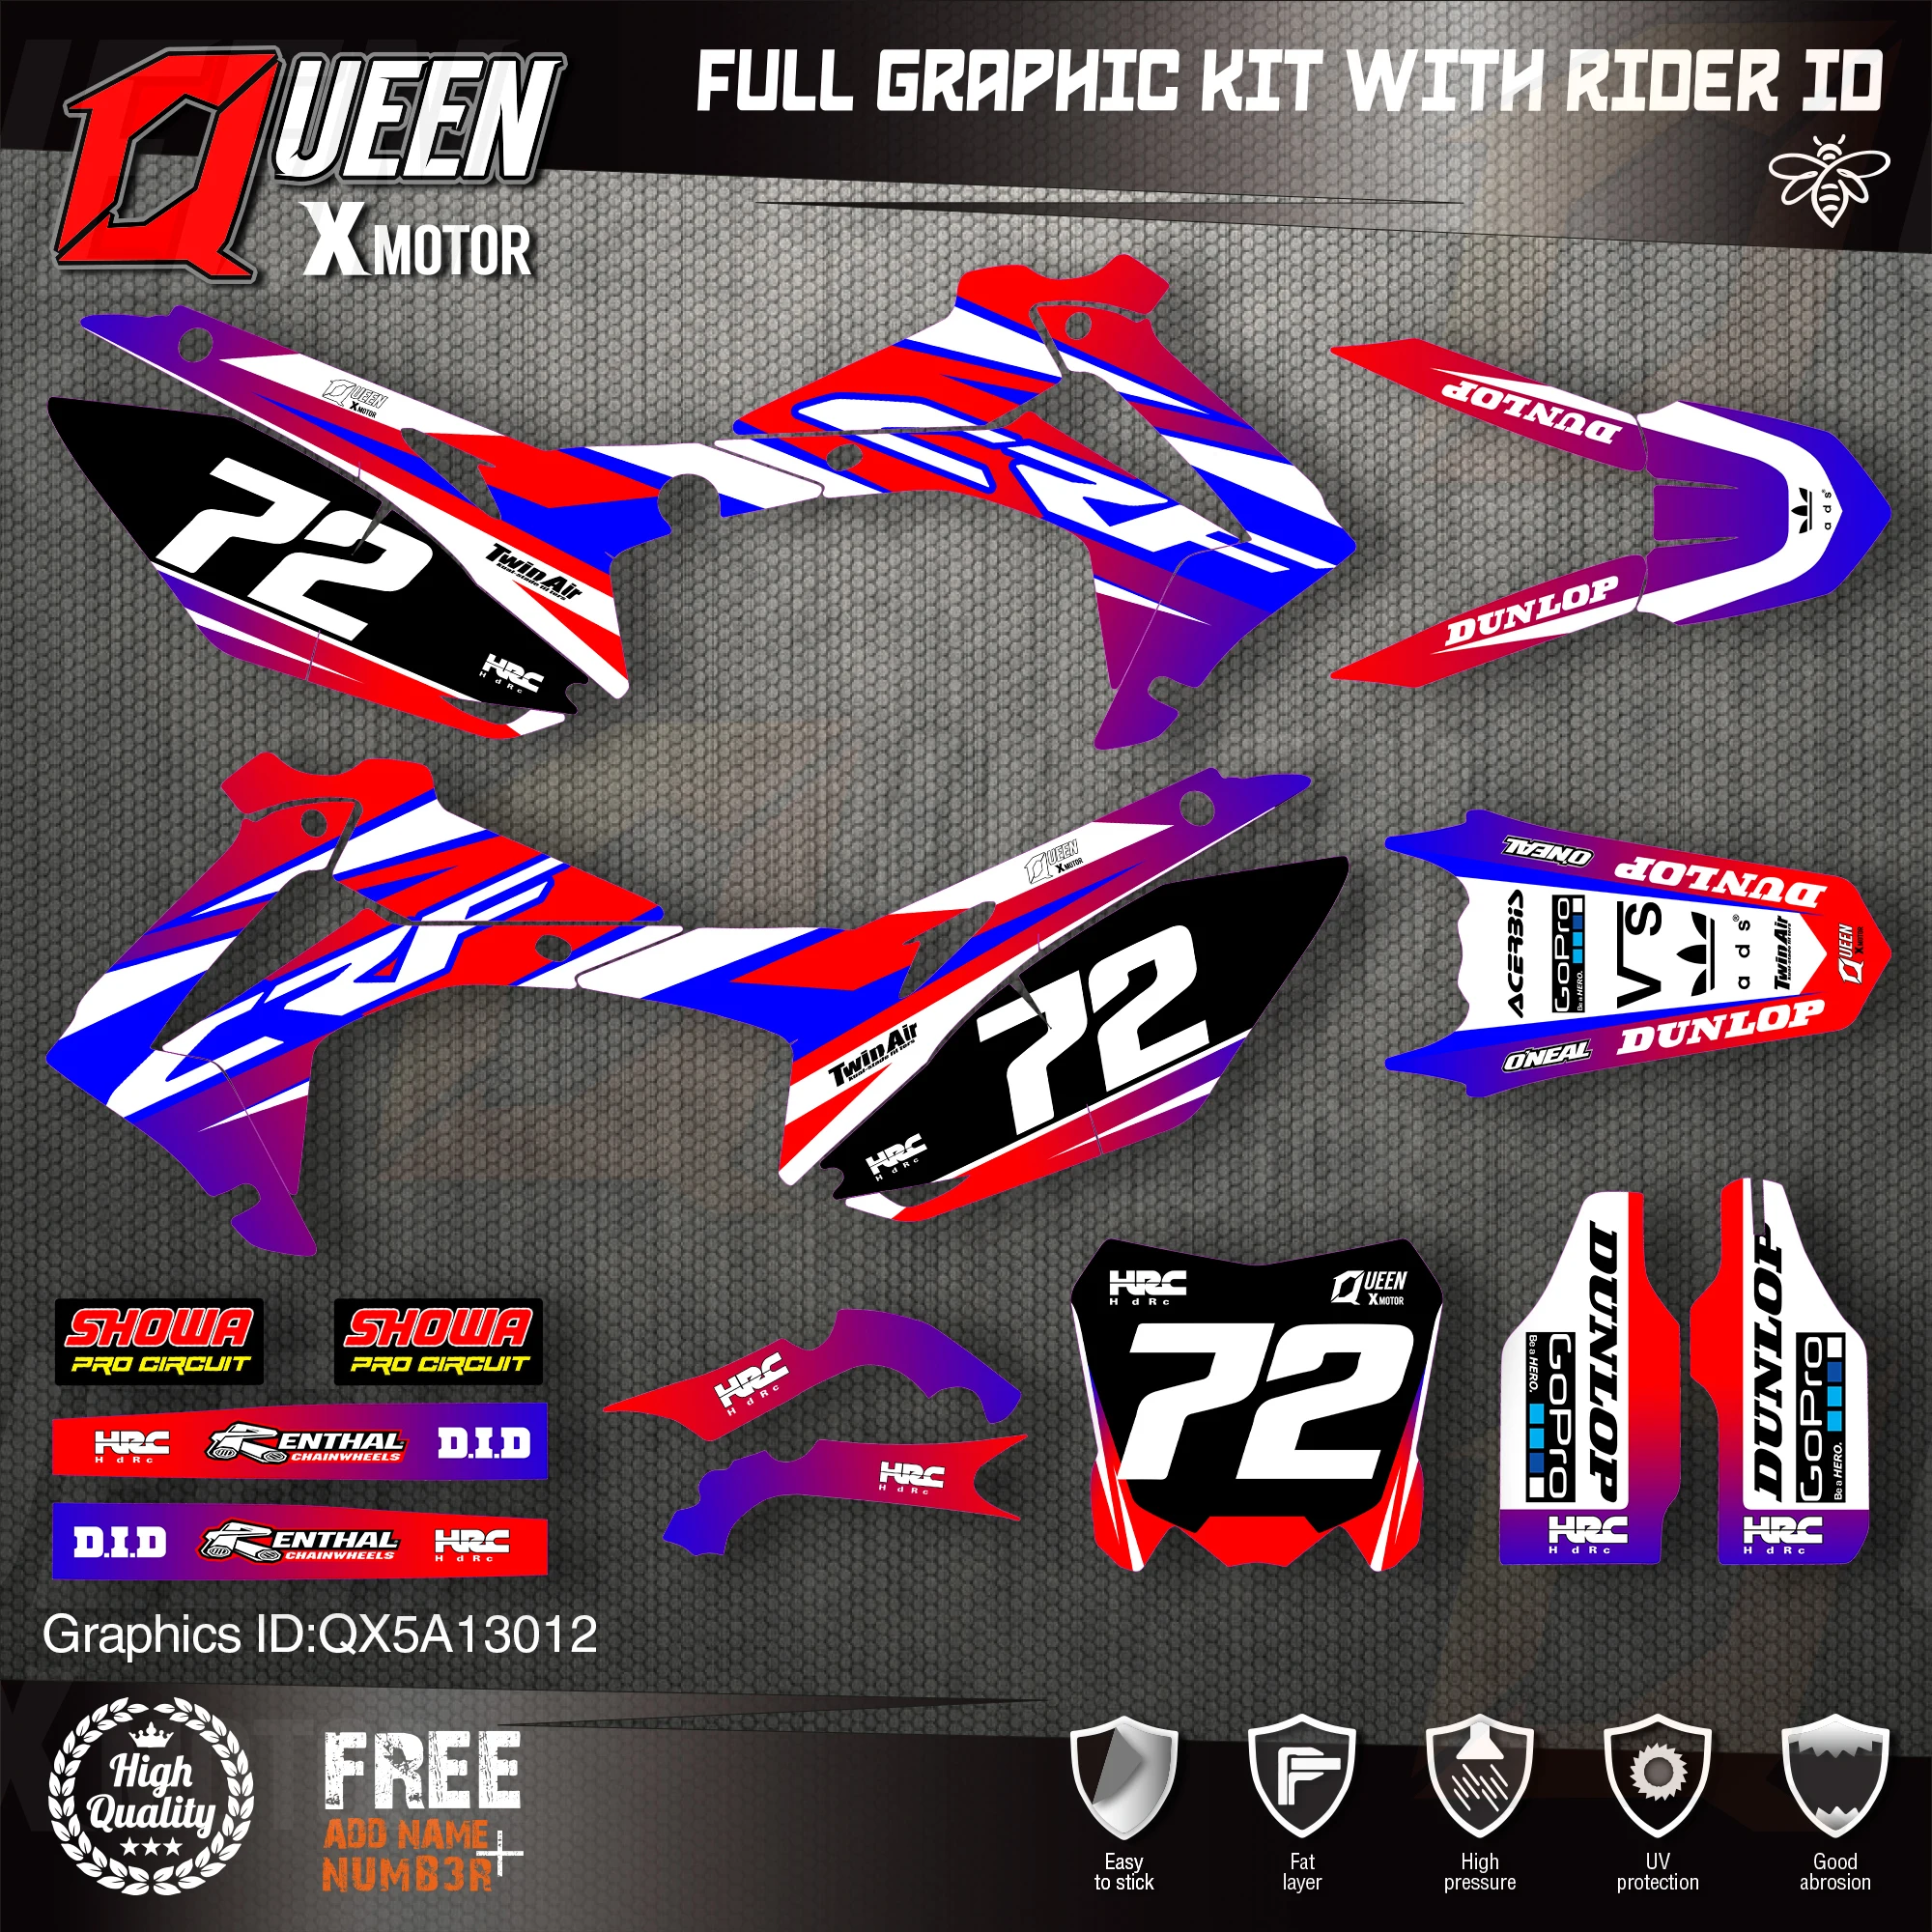 

QUEEN X MOTOR Custom Team Graphics Backgrounds Decals Stickers Kit For HONDA 2014-2017 CRF250R 2013-2016 CRF450R 012